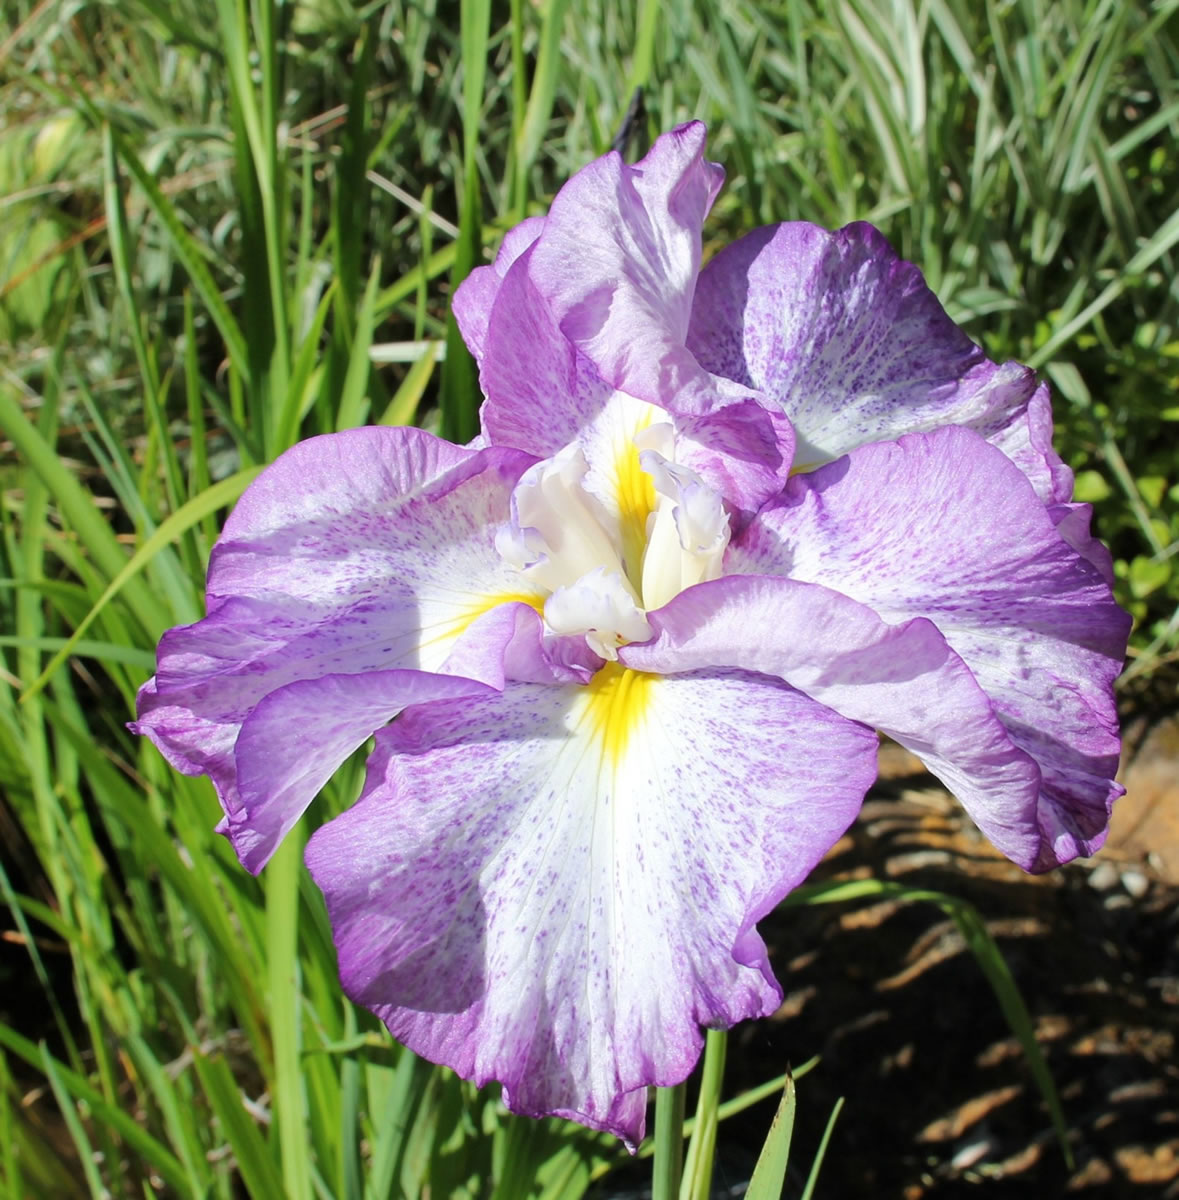 Flowers of the Japanese iris are short lived but well worth the impact they have on the garden.